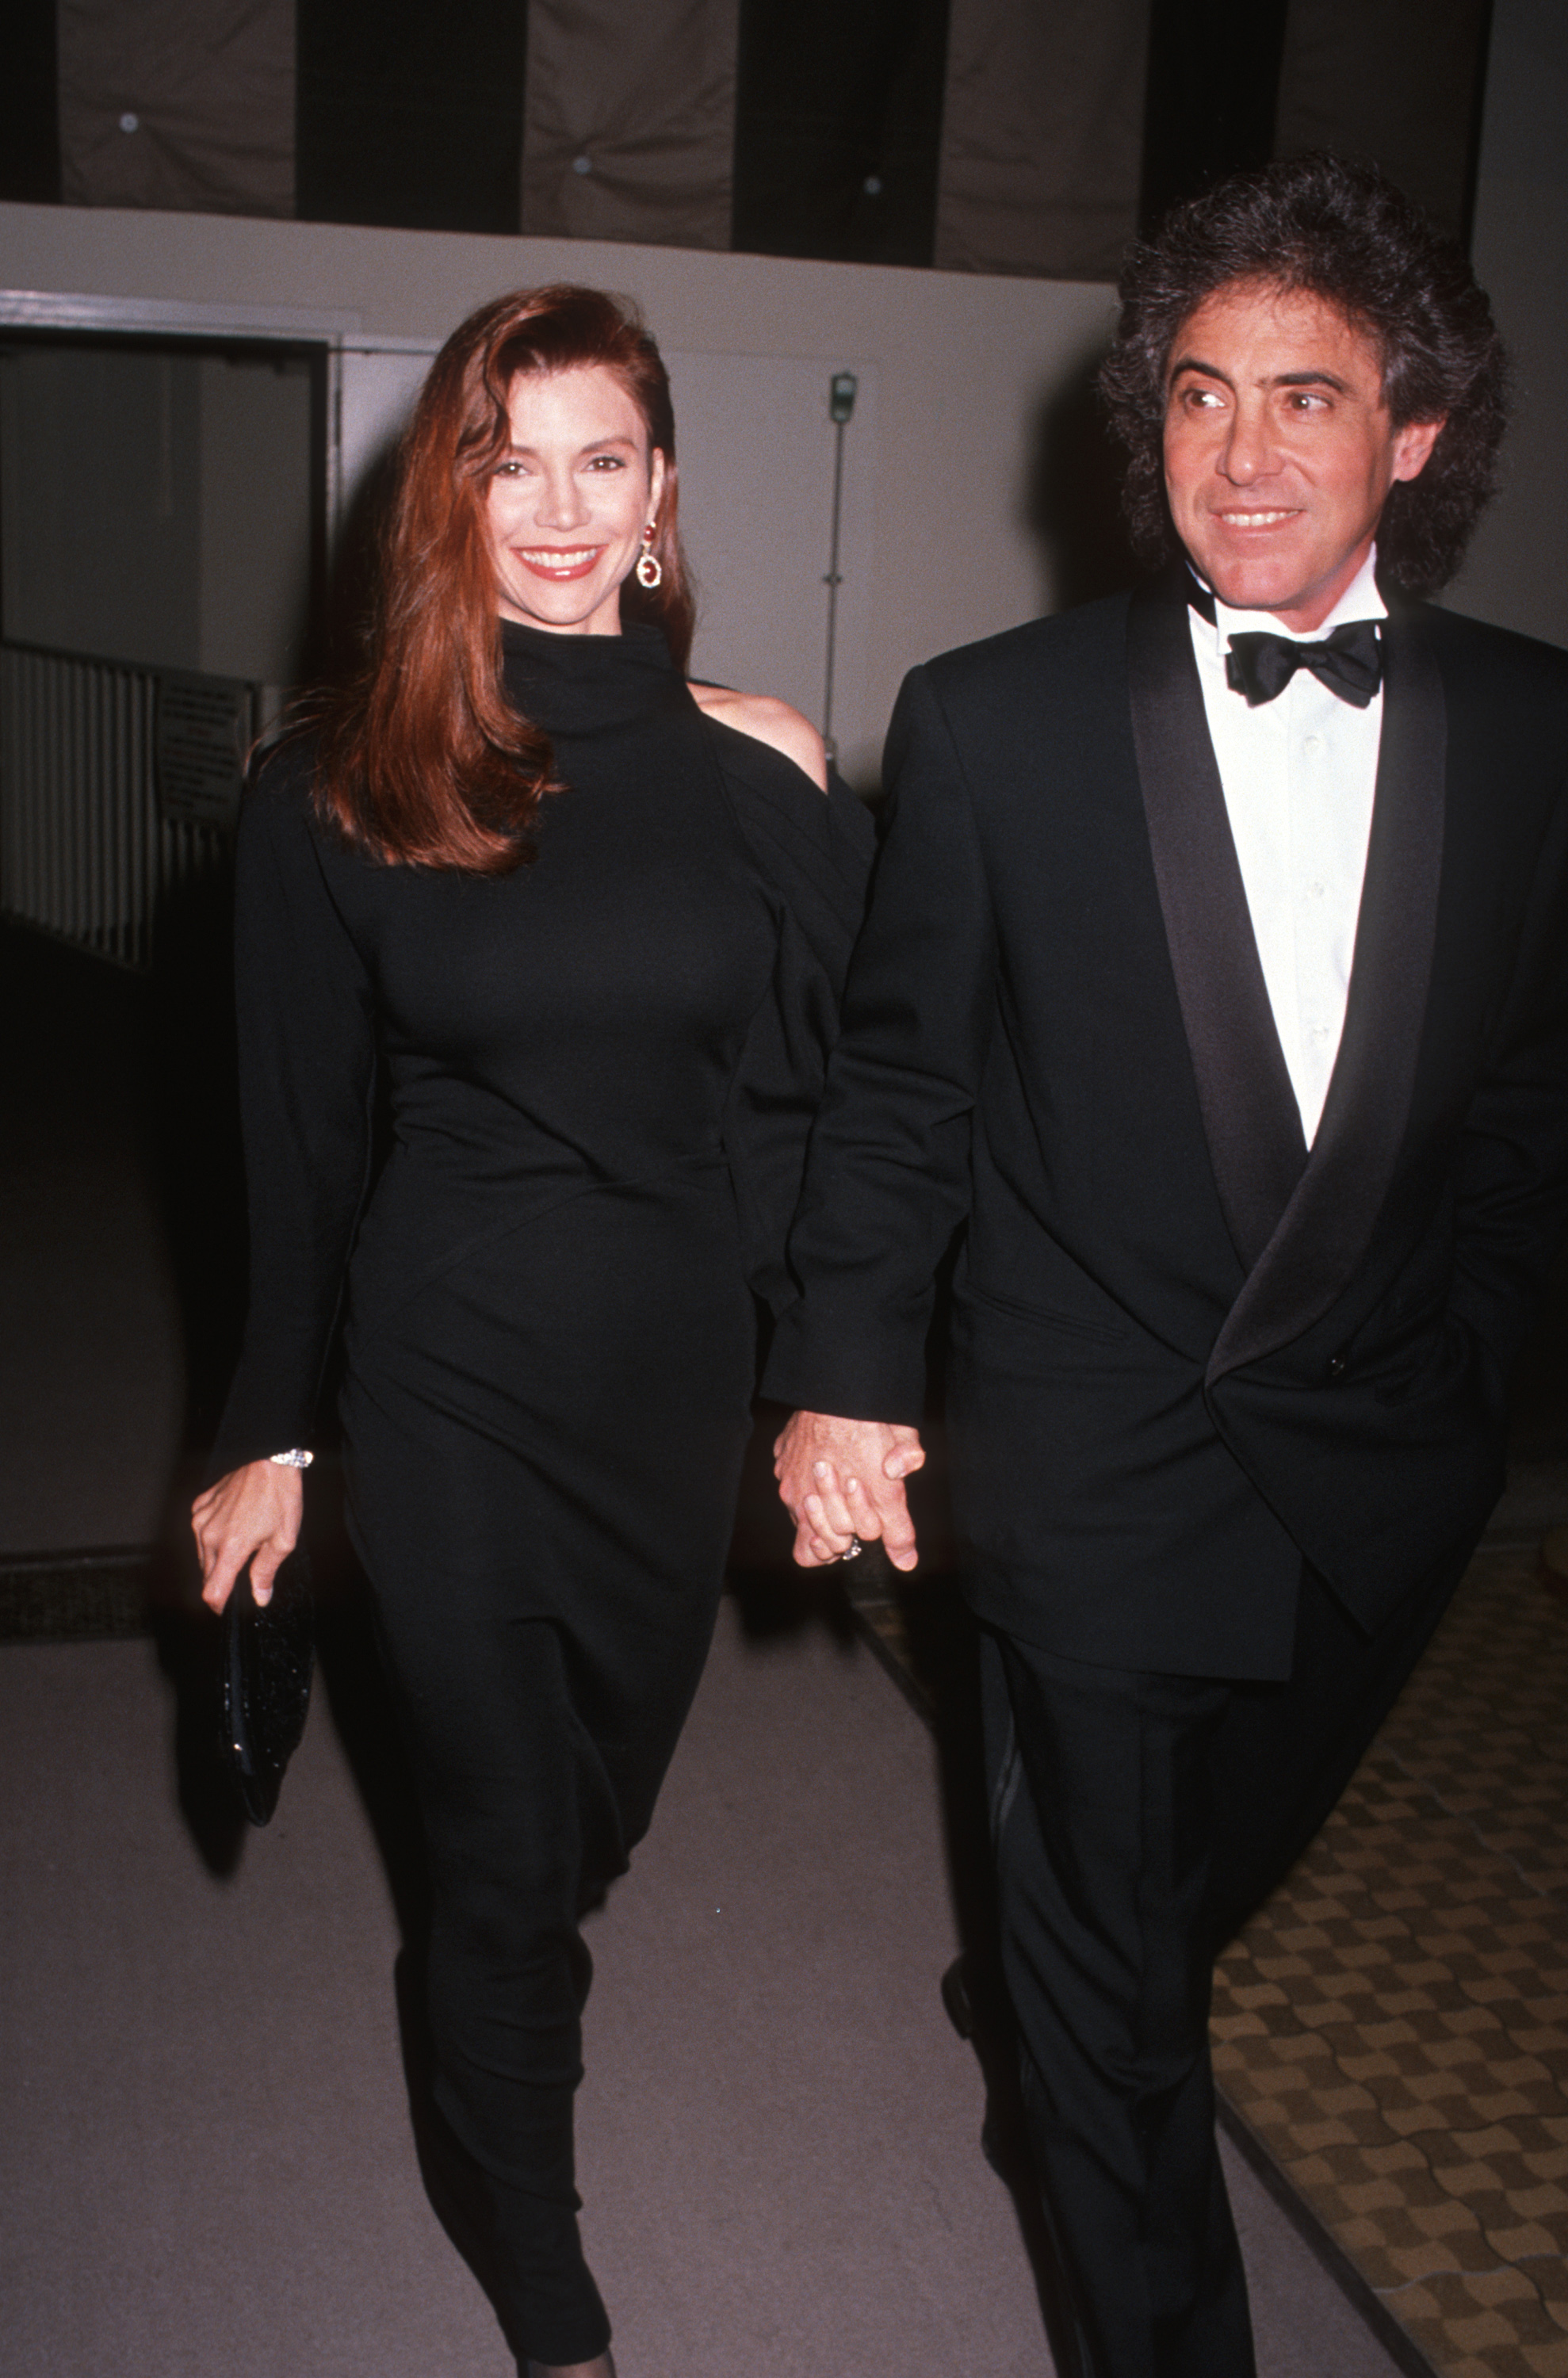 Victoria Principal and Harry Glassman in Beverly Hills, California on November 29, 1989 | Source: Getty Images